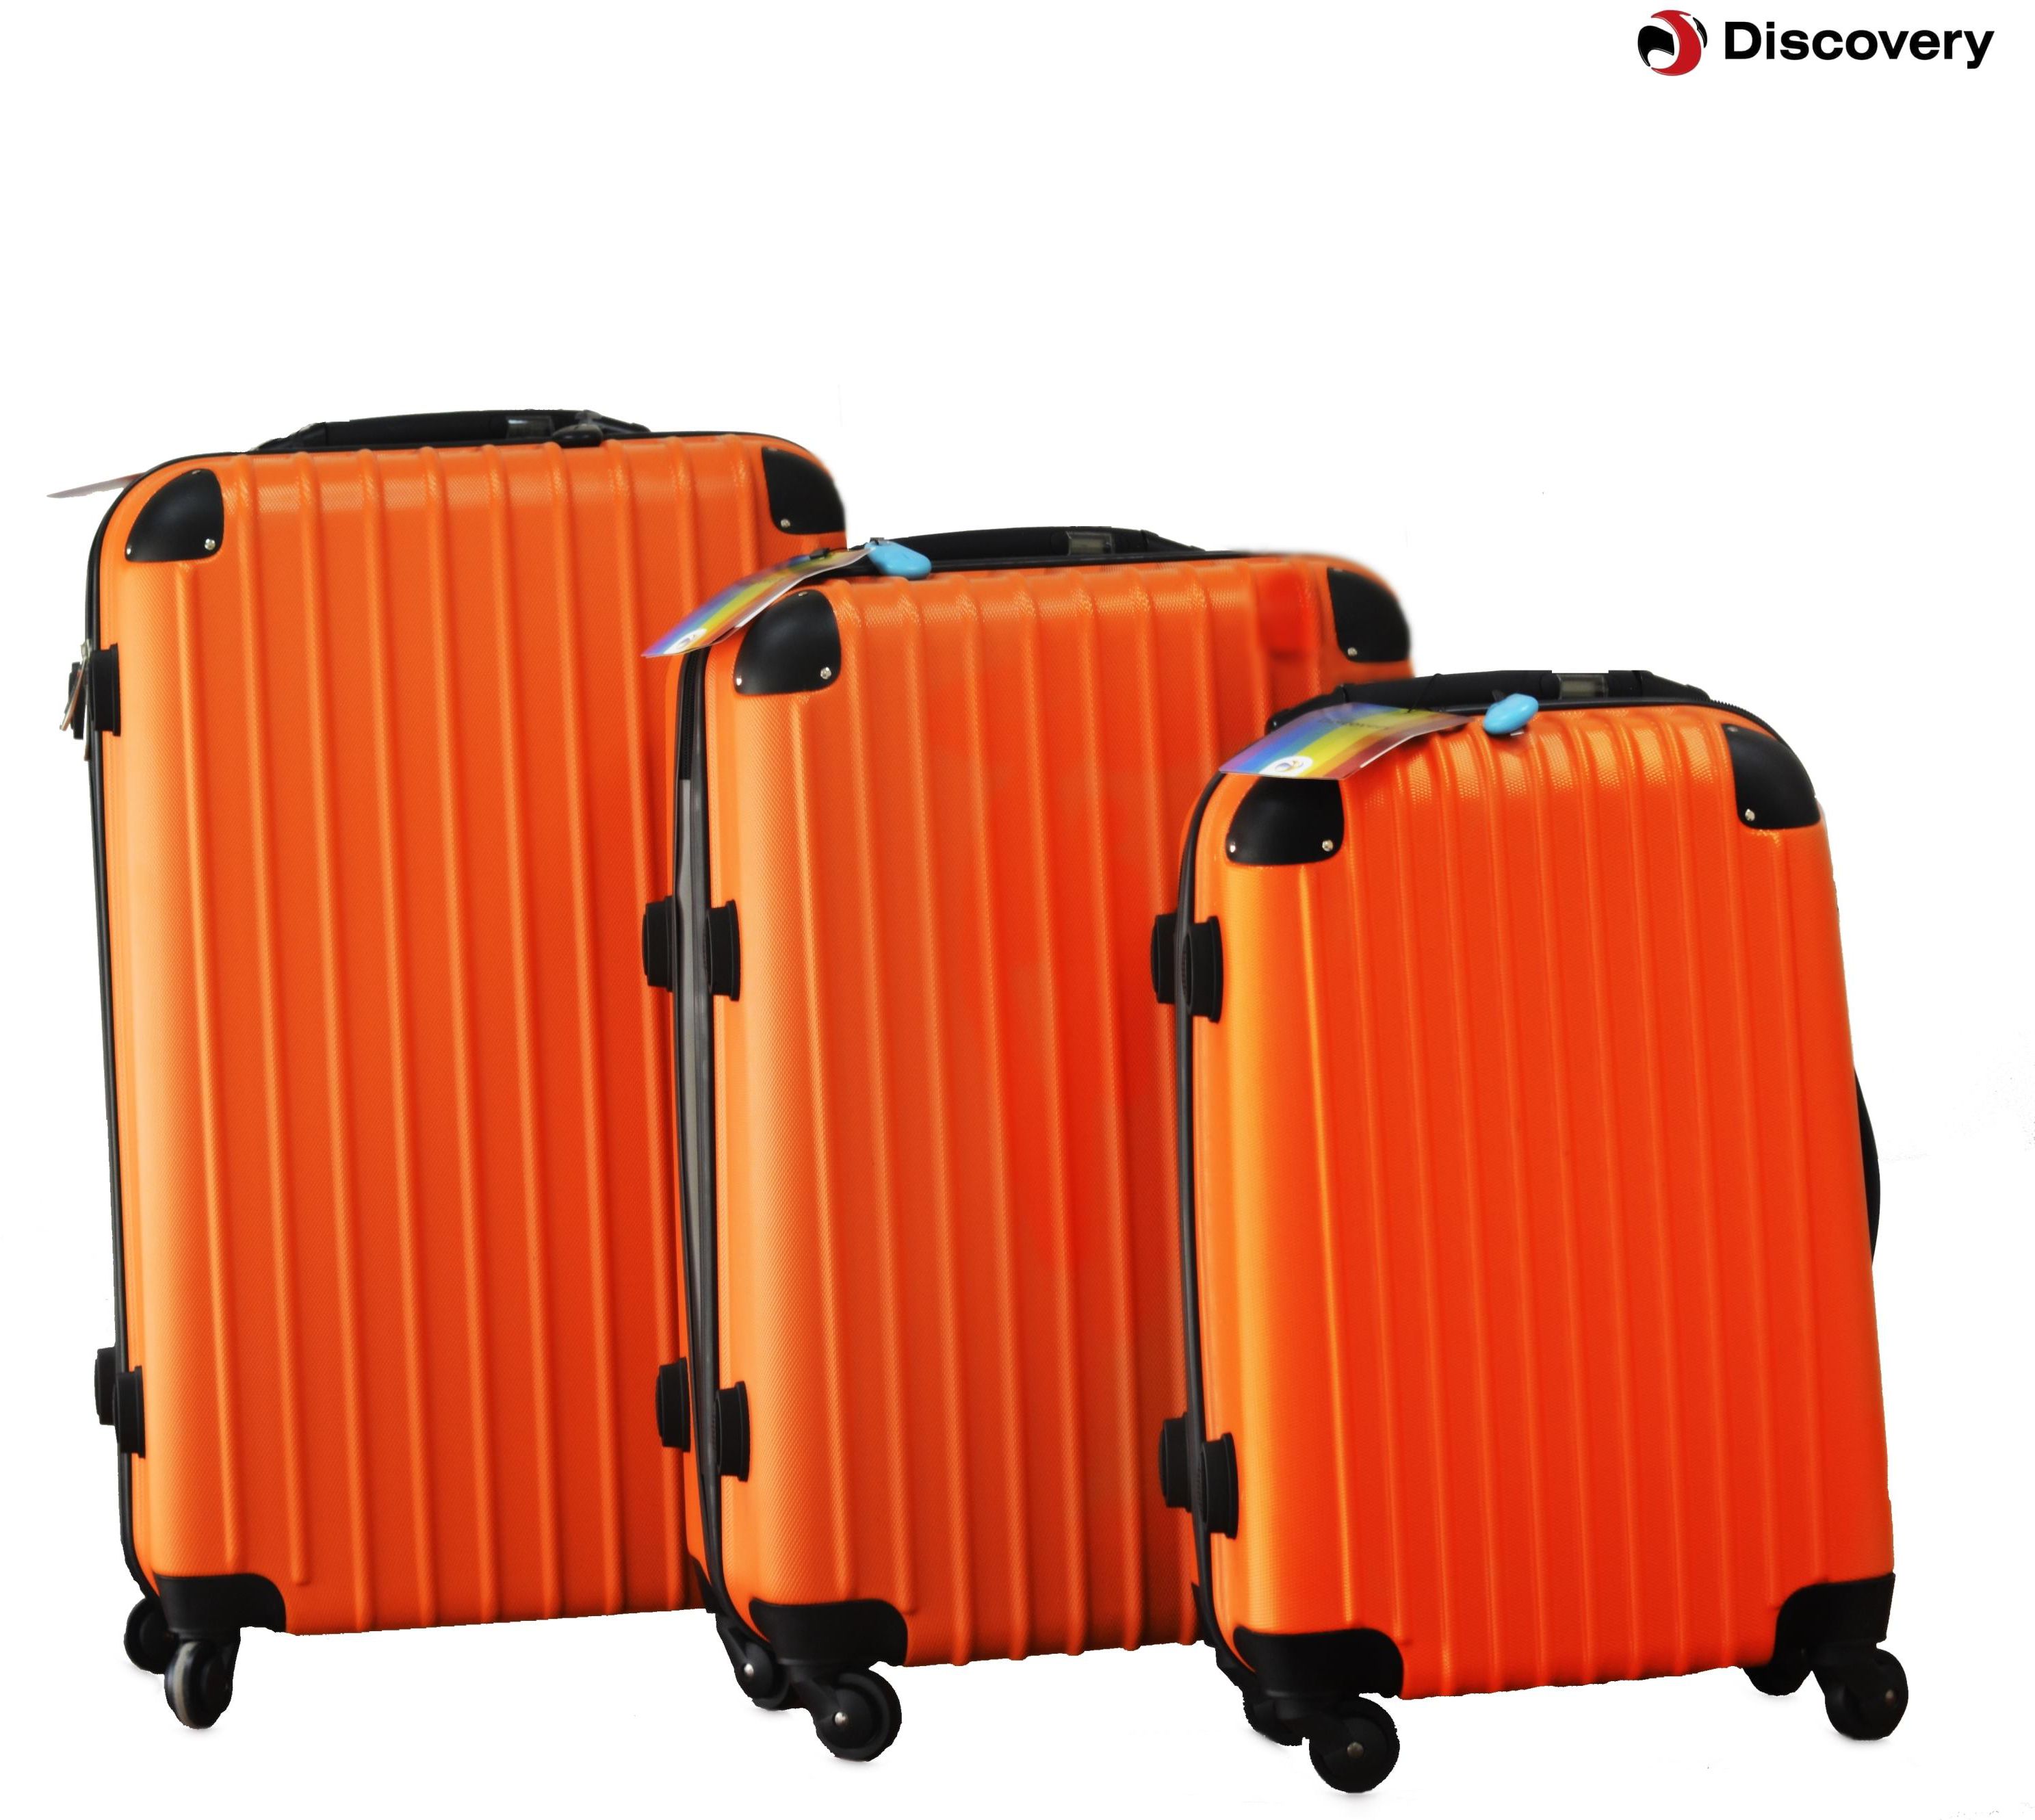 Discovery Smart Luggage with Digital Weight Measuring Scale -Hard- Anti scratch Material Orange